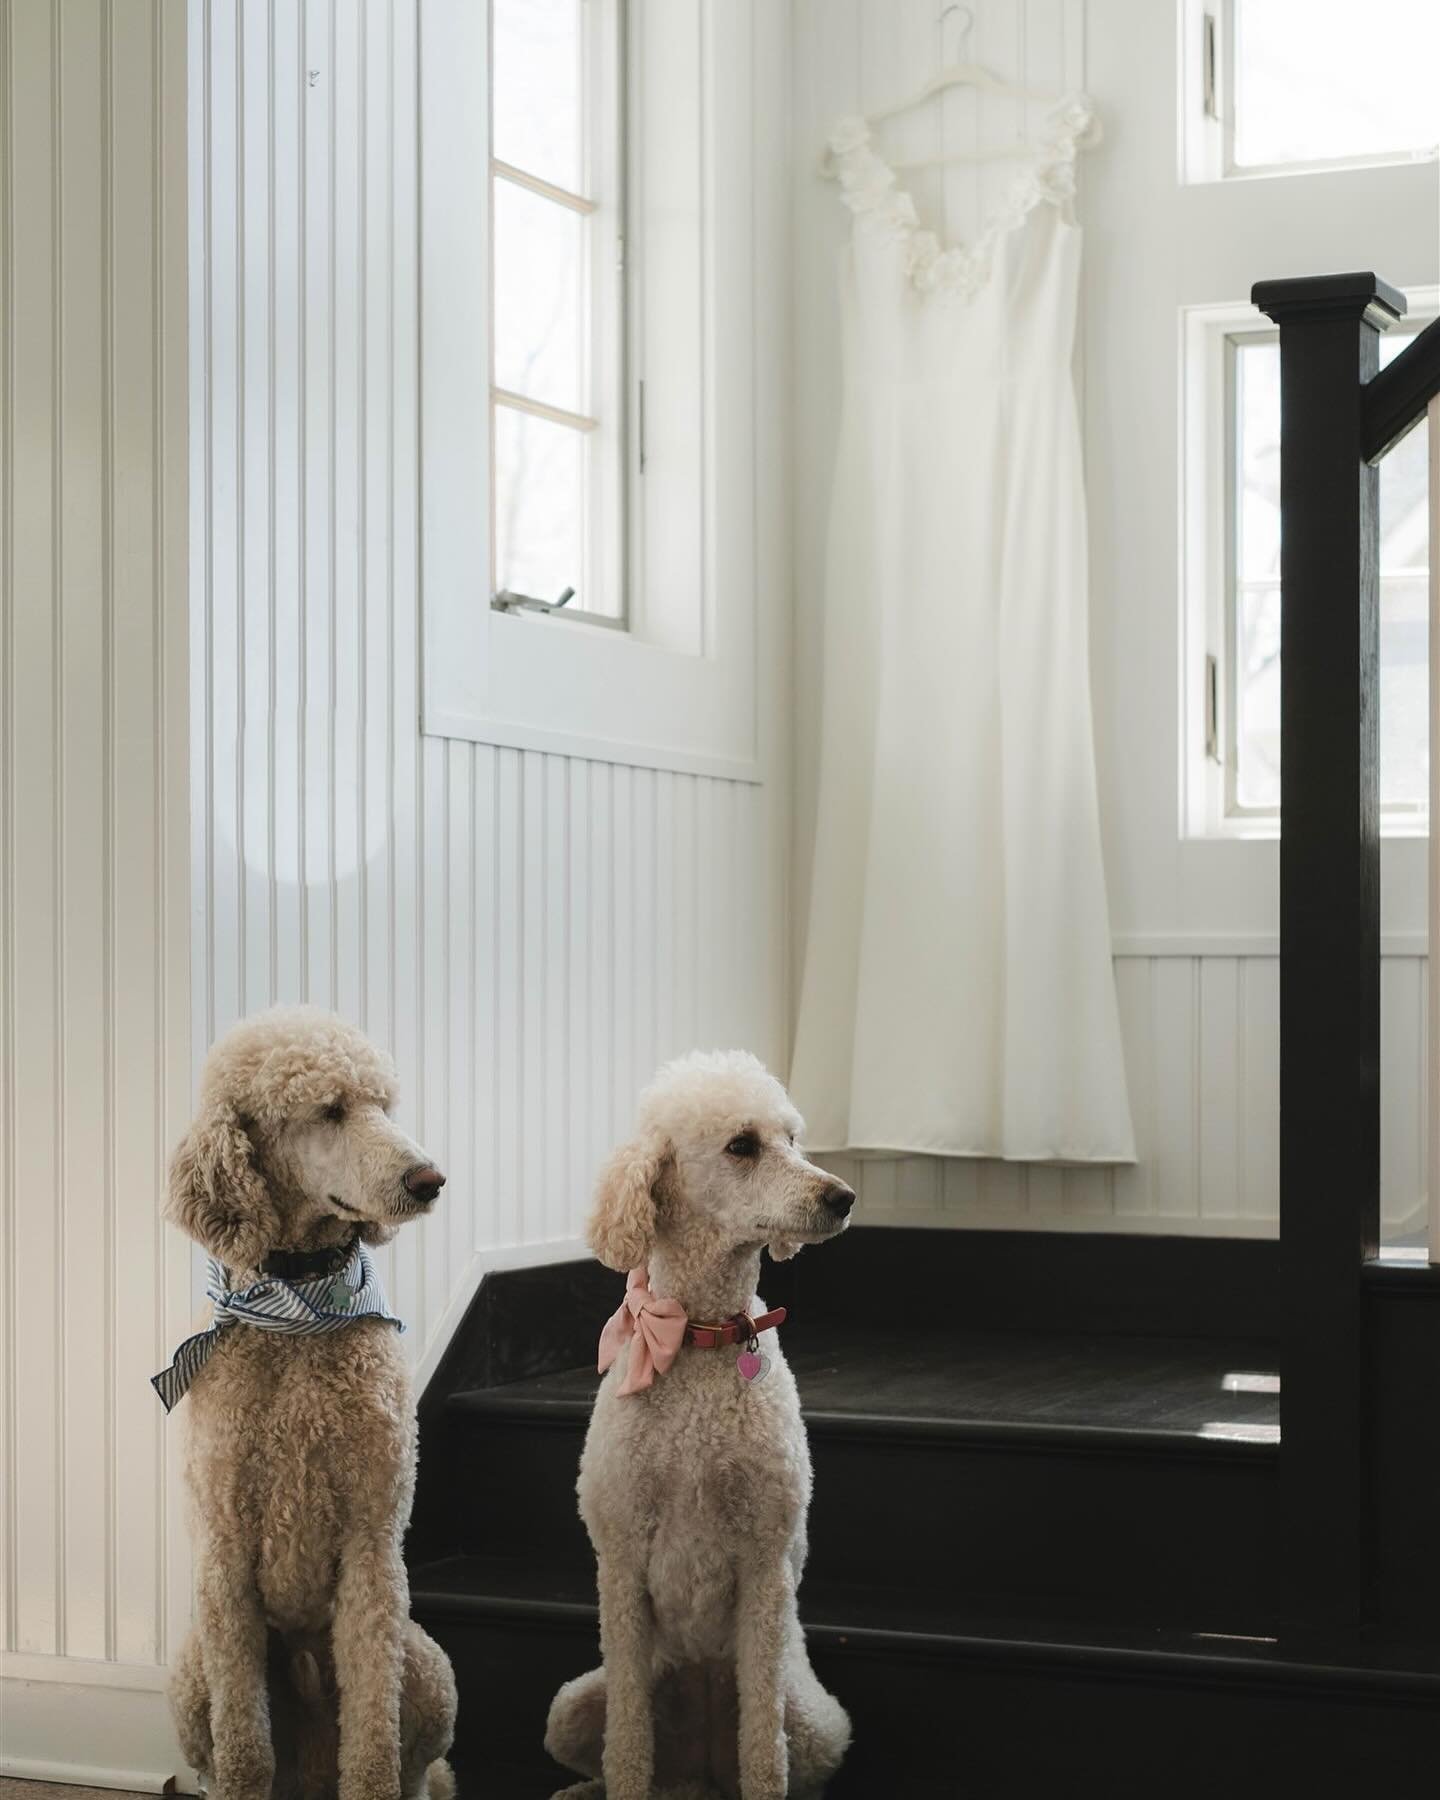 A ✨ dramatic pause ✨ for this dress and the cutest pups 🐶 some of the sweetest dogs that definitely needed their own special moment with this dress too 🫶

Did you involve your pet(s) in your wedding day? Lmk! ⬇️

CT wedding photographer, Connecticu